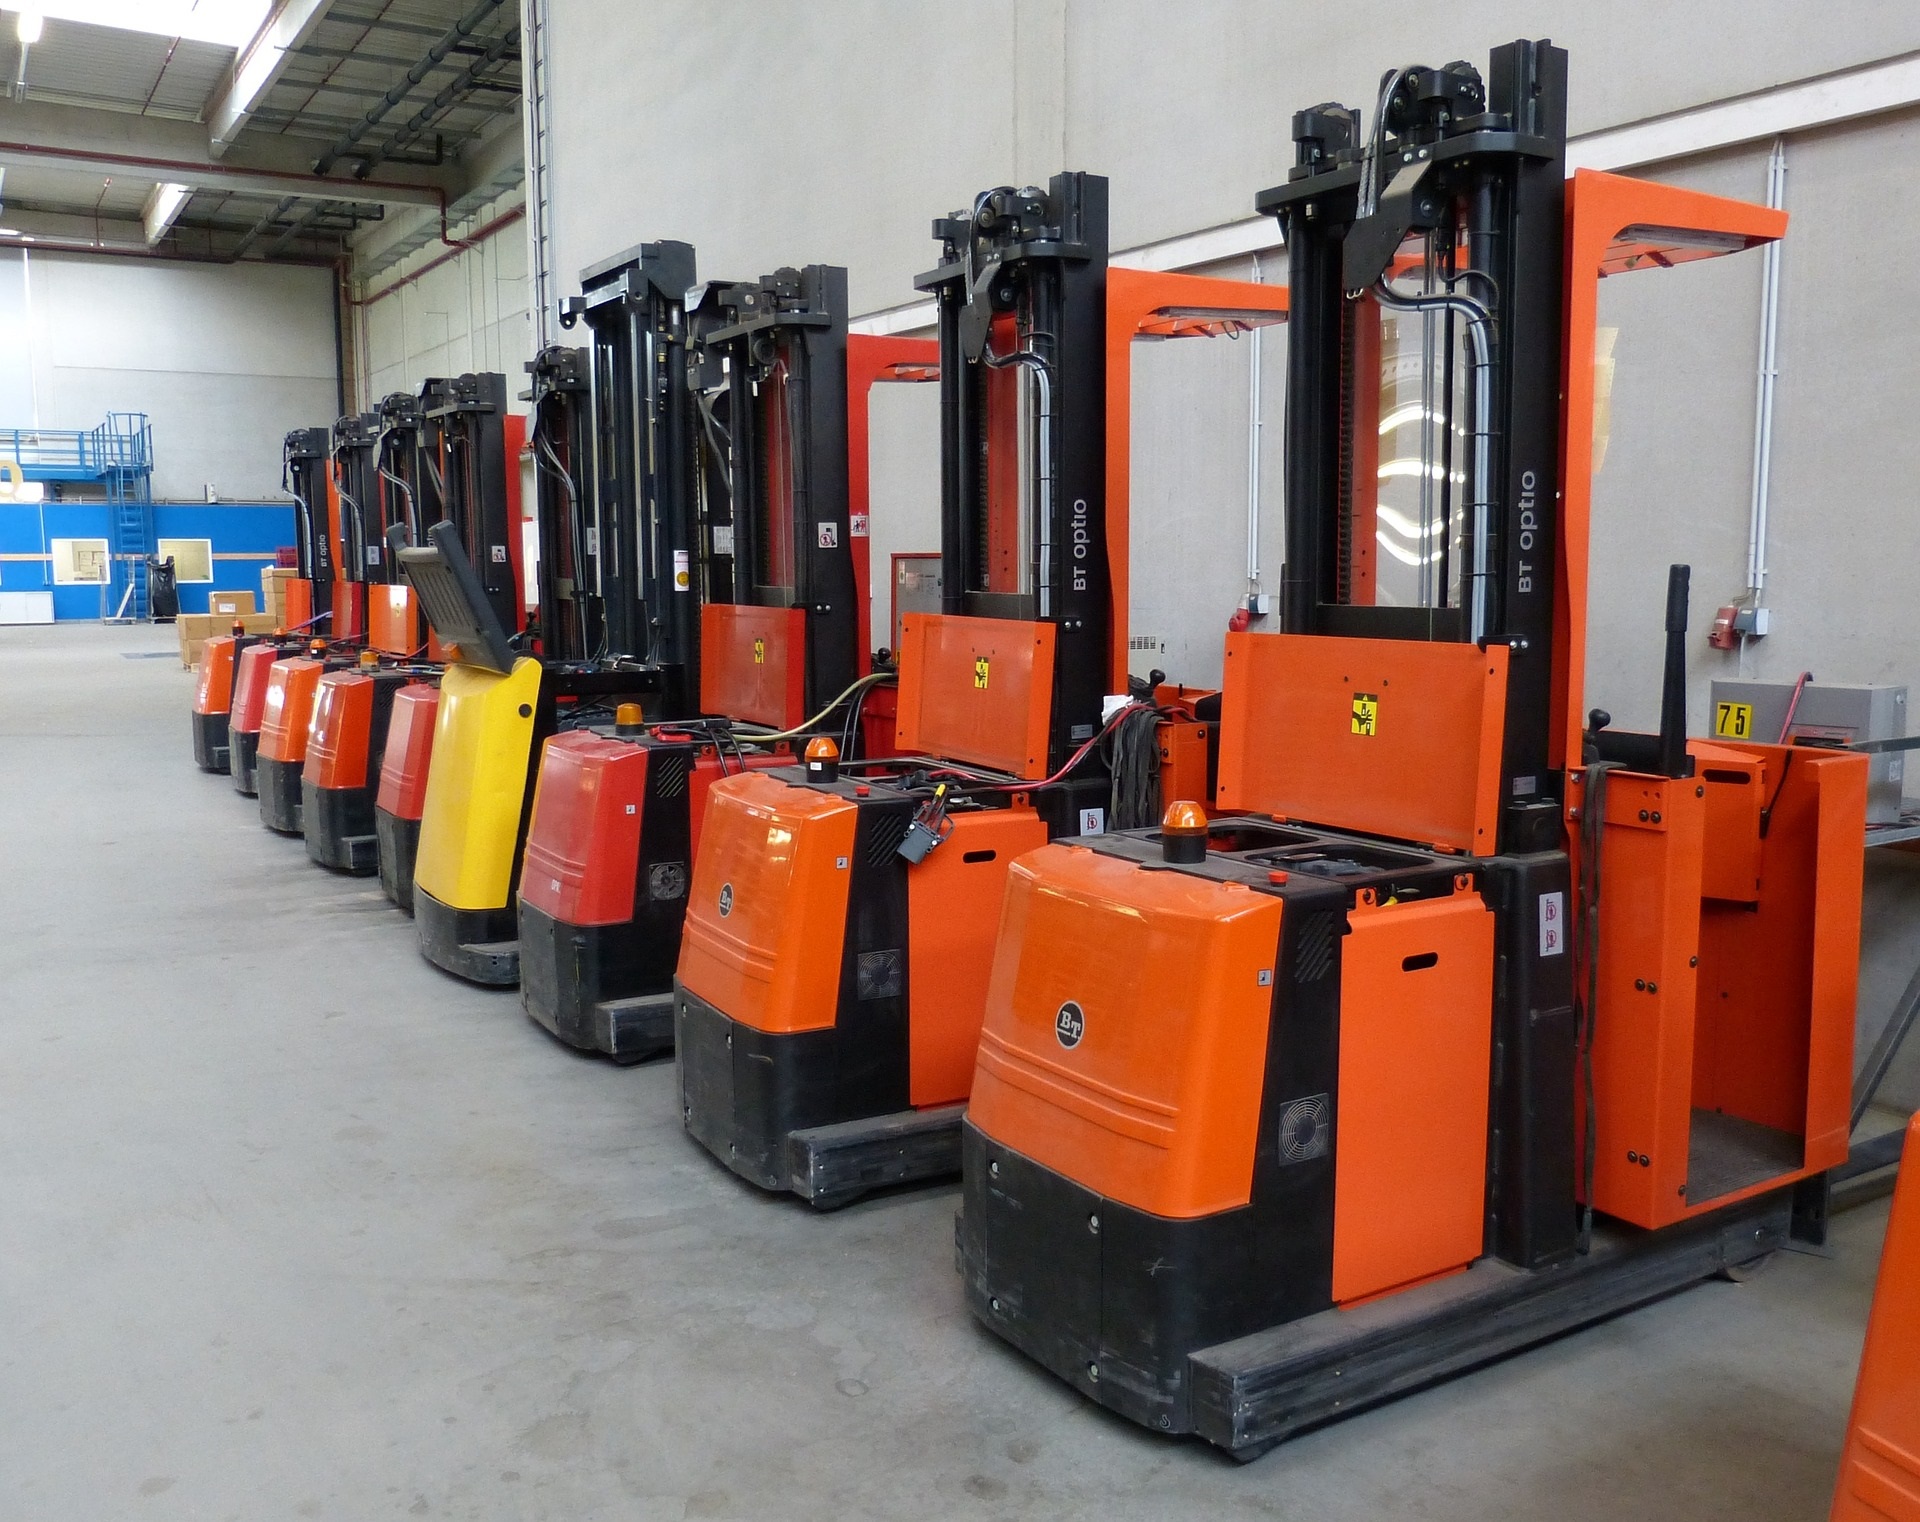 Propane-Vs.-Electric-Forklifts Propane Vs. Electric Forklifts